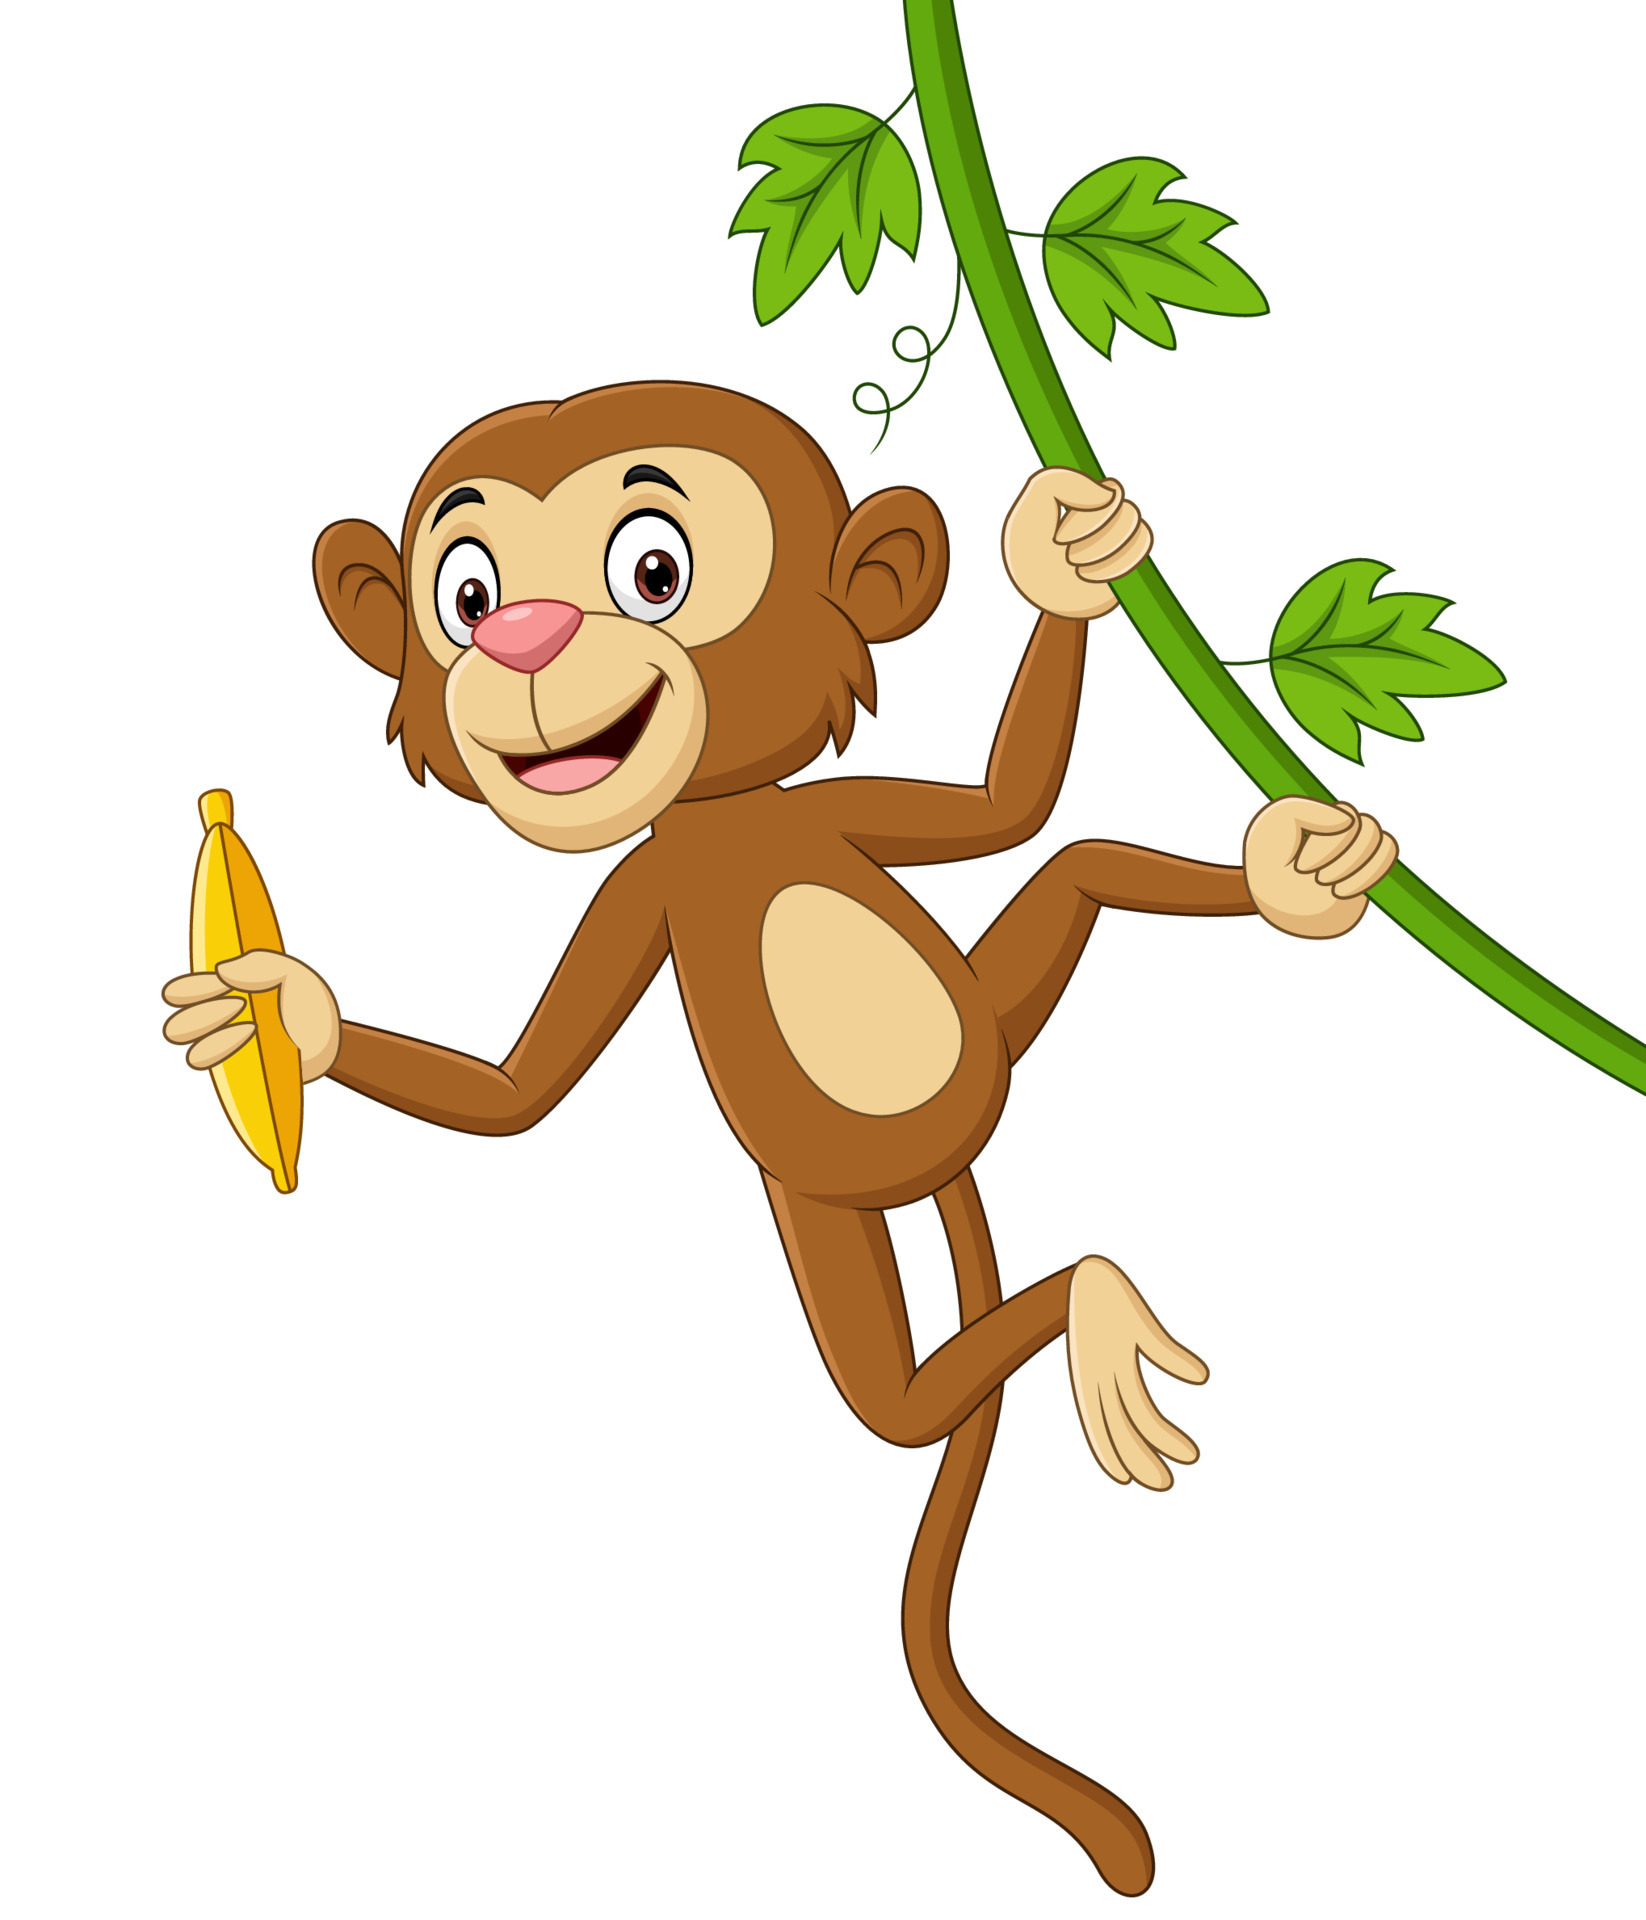 Monkey Vector Art, Icons, and Graphics for Free Download